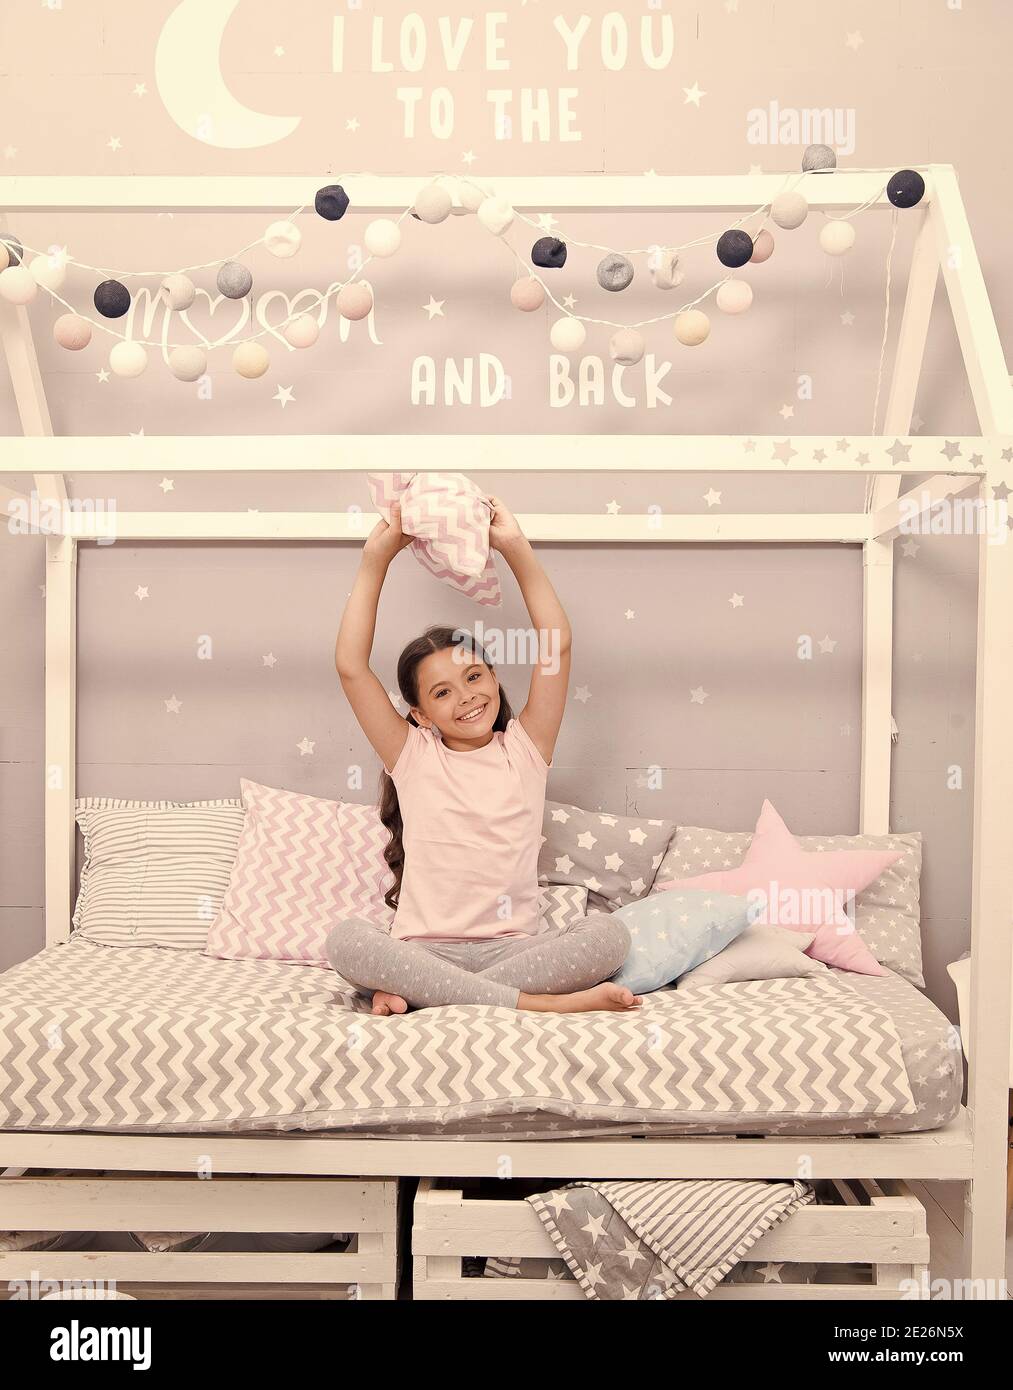 Home is best. Small girl feel happy at home. Little child sit on bed. Cozy home. Home clothing. Fashion and style. Rest and relaxation. Bedtime routine. Leisure and lounge. Stock Photo